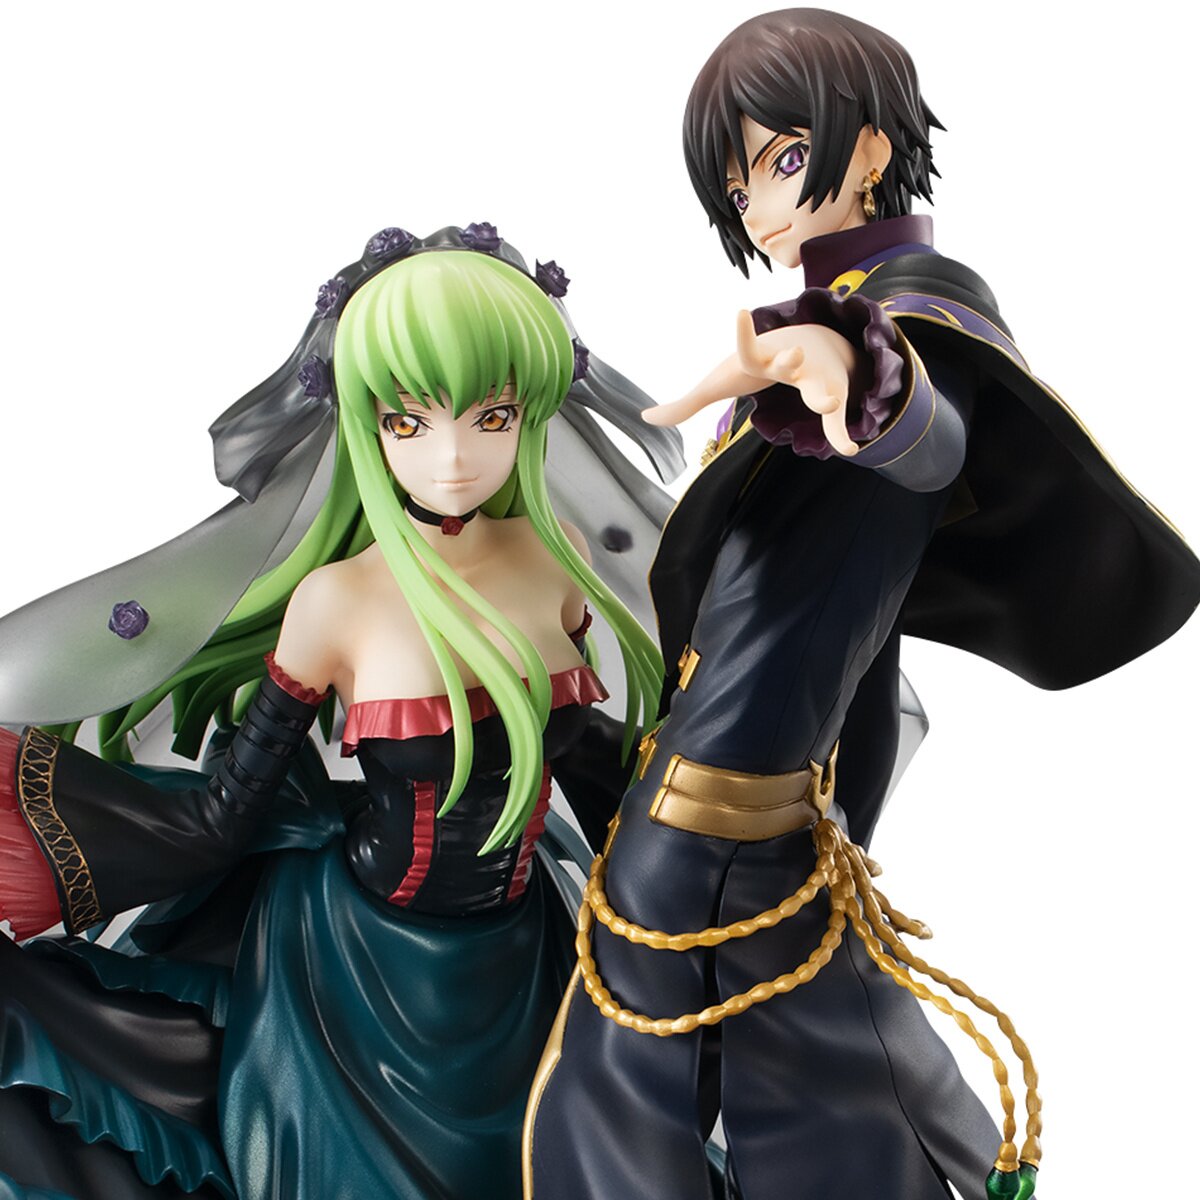 Anime CODE GEASS Lelouch of the RE:surrection Lelouch Lamperouge